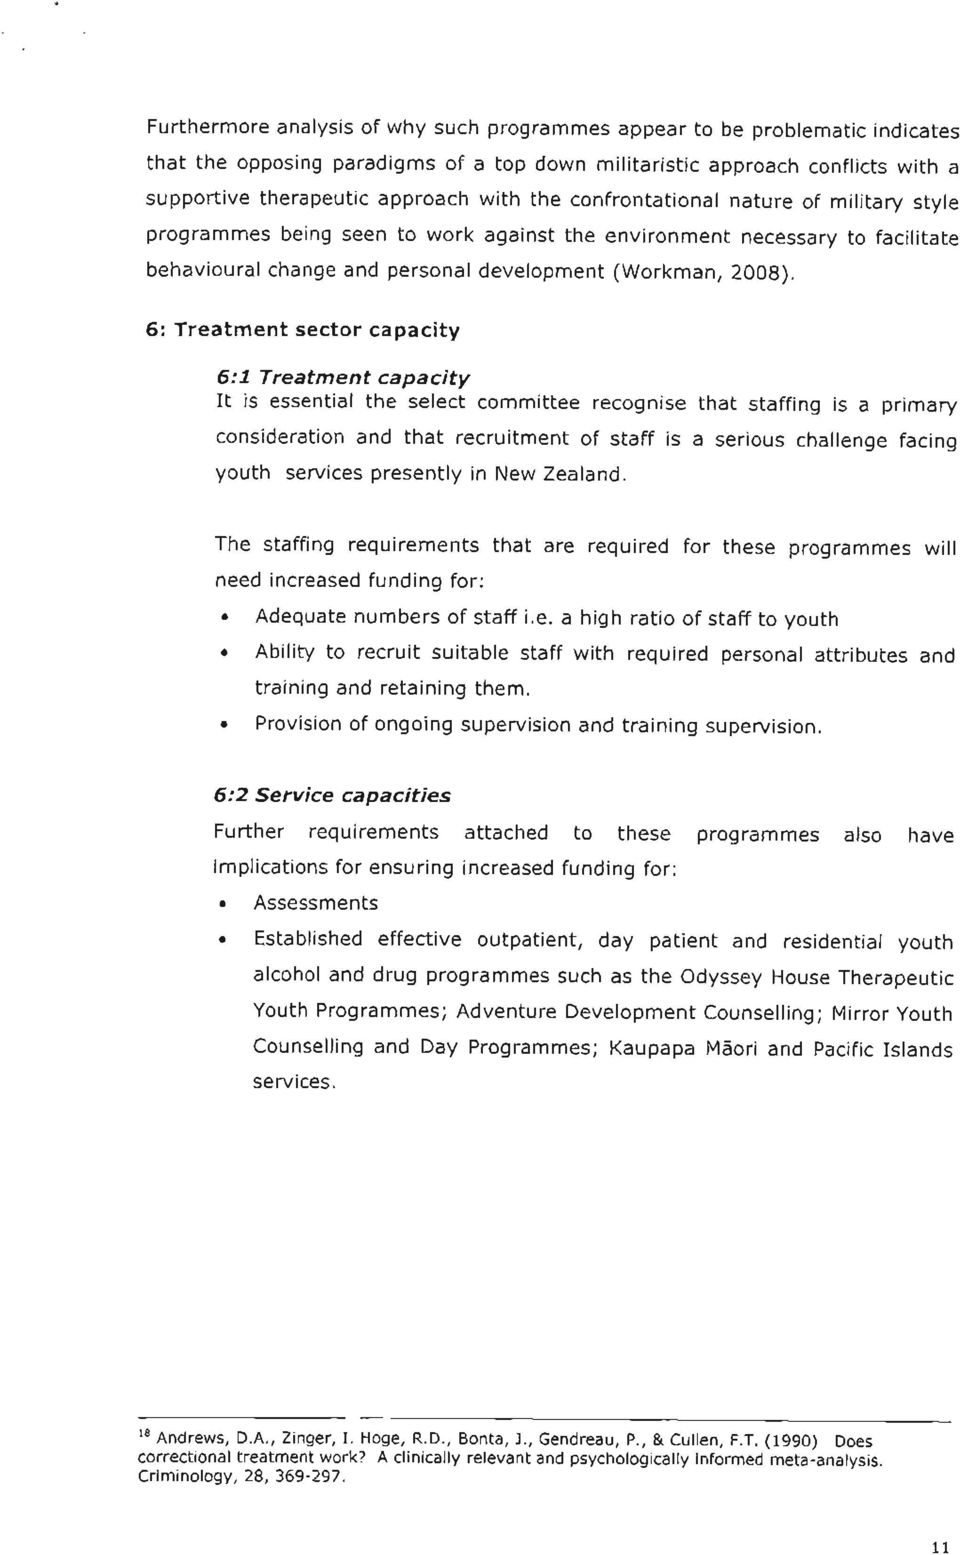 6: Treatment sector capacity 6:1 Treatment capacity It is essential the select committee recognise that staffing is a primary consideration and that recruitment of staff is a serious challenge facing